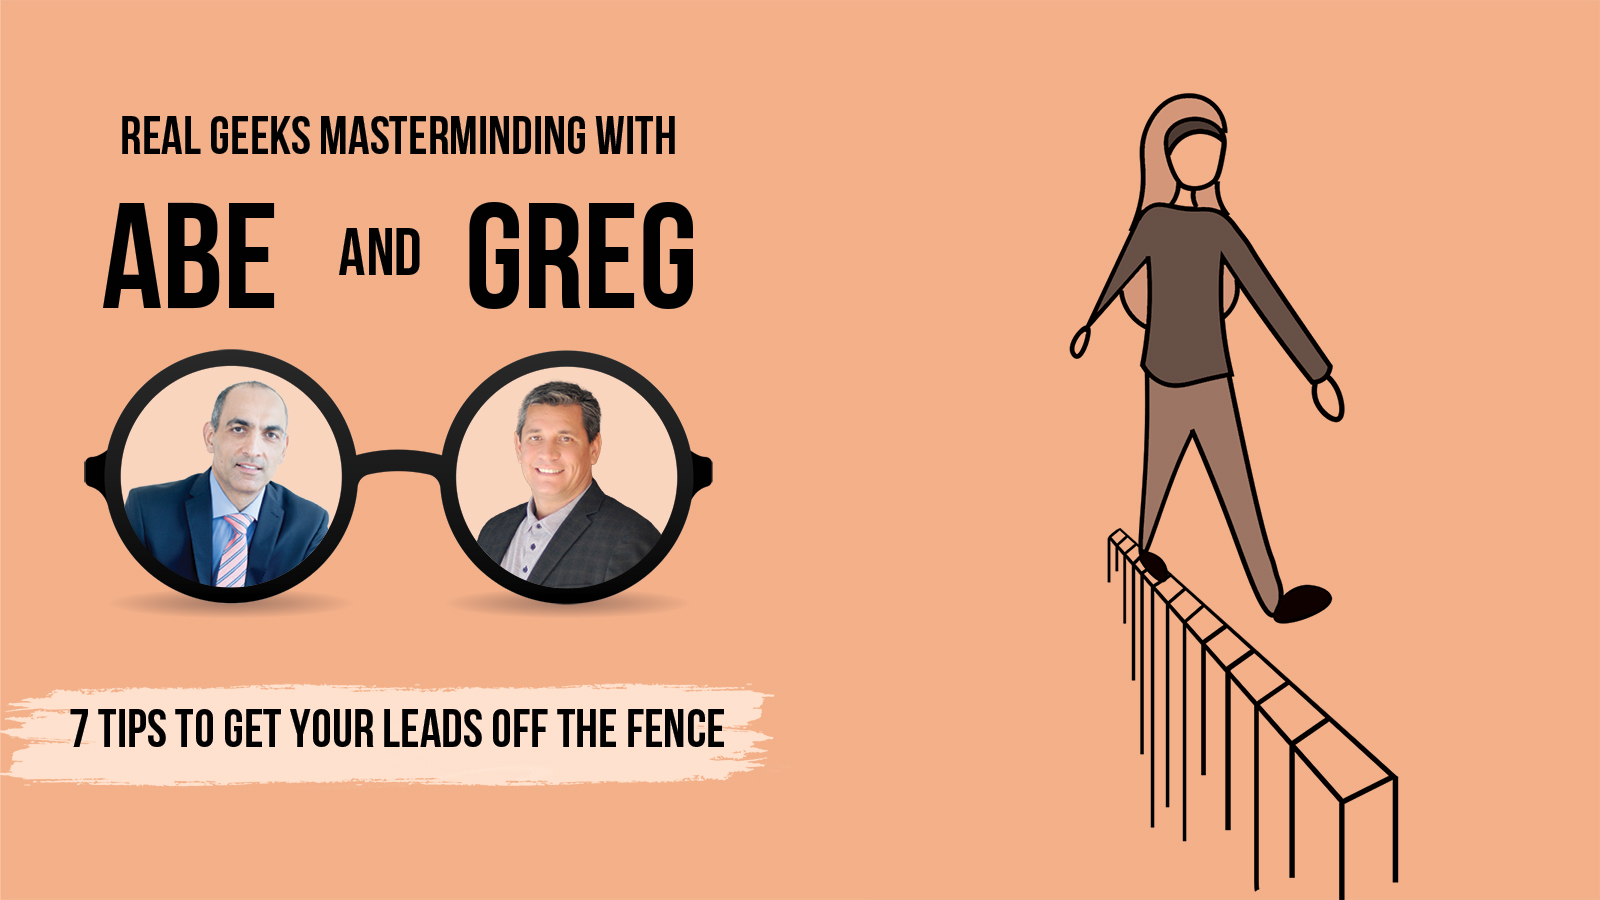 How To Get Your Leads Off the Fence